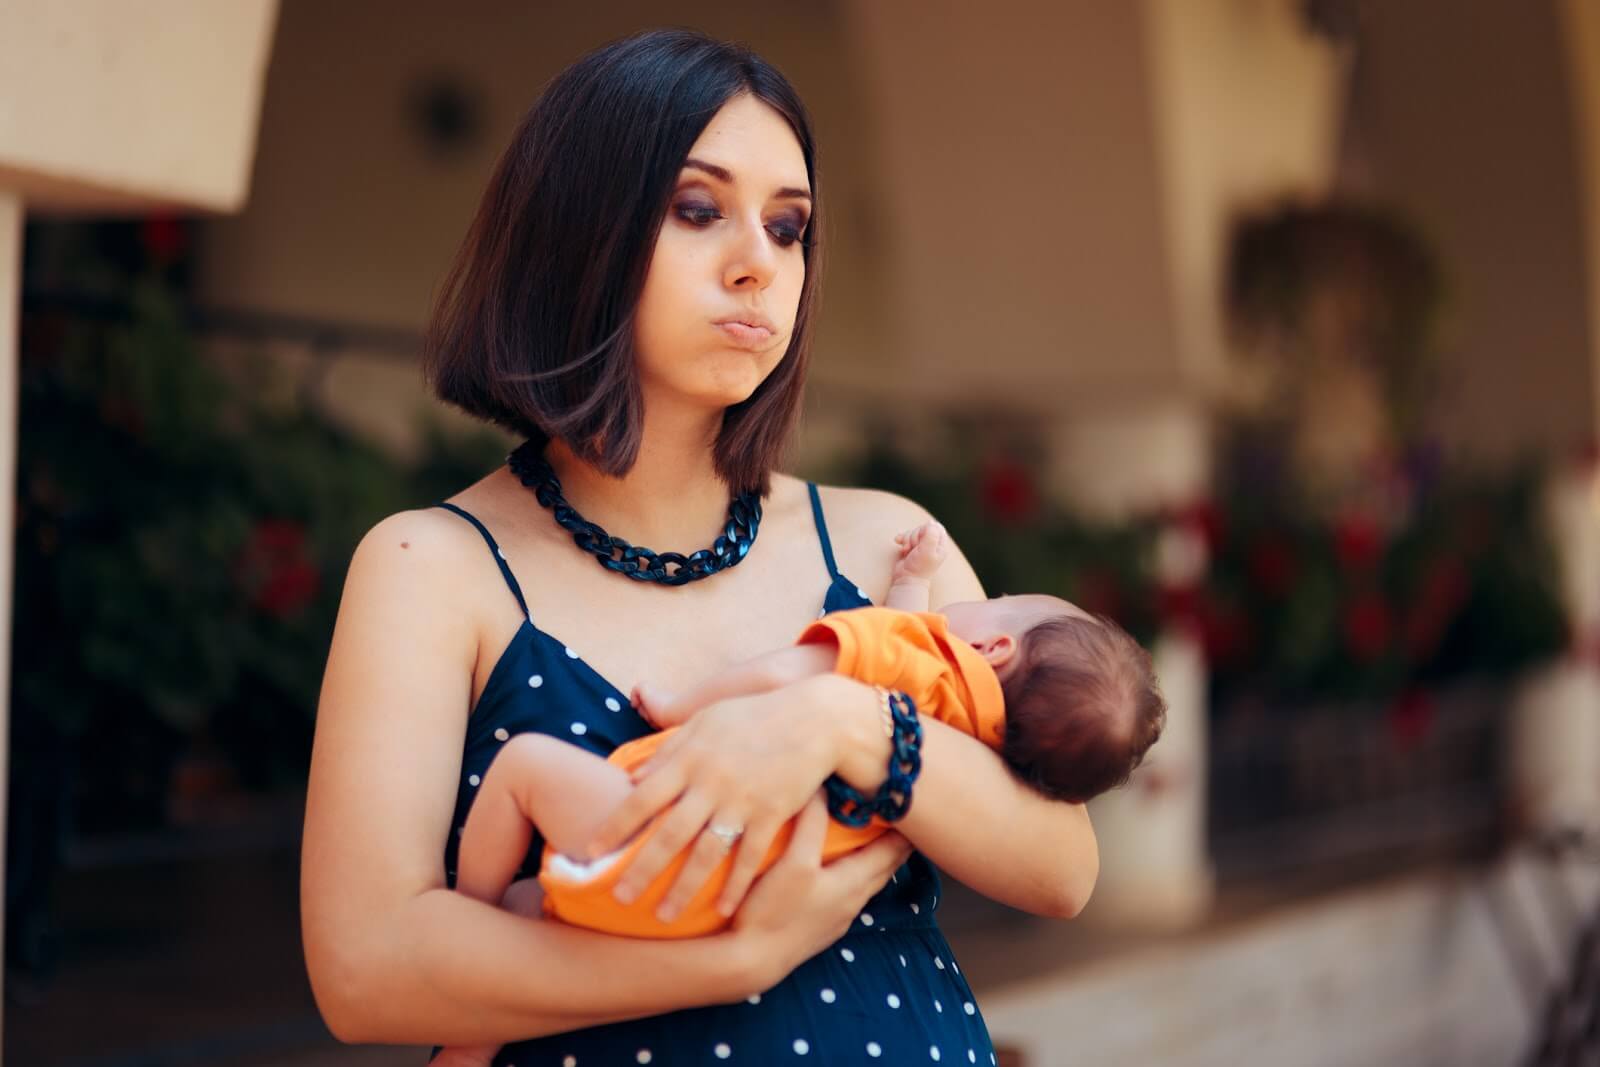 How Your Postpartum Body May Change—and What to Do About It